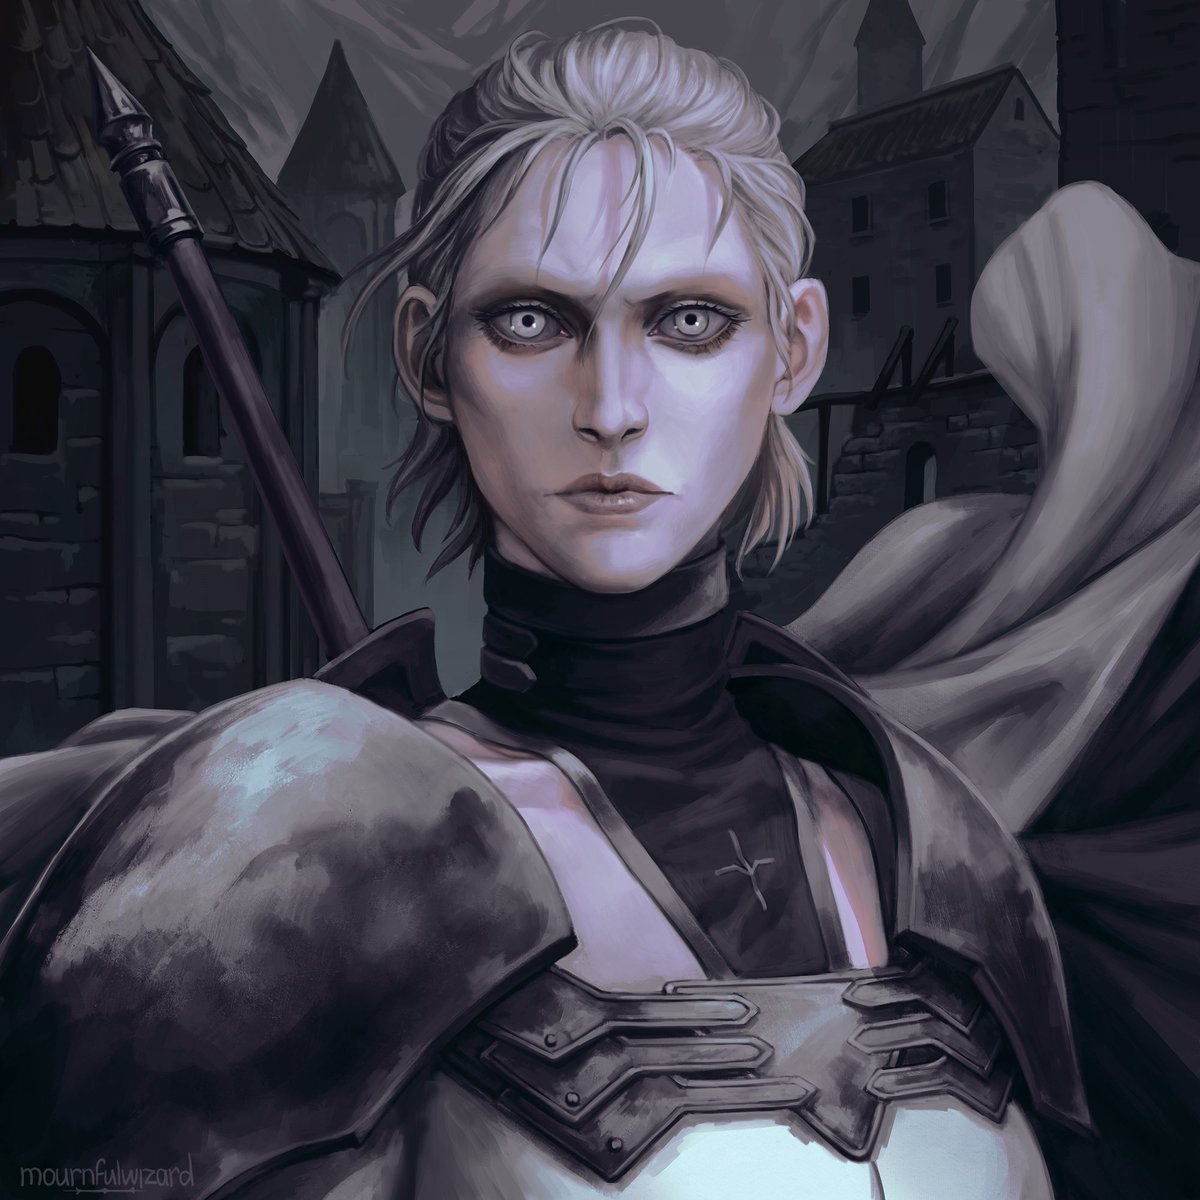 𝖒𝖔𝖚𝖗𝖓𝖋𝖚𝖑𝖜𝖎𝖟𝖆𝖗𝖉 Commission For Valenshawke Of Jean From Claymore It Always Feels So Great When People Commission You Something From Your Favorite Works Of Fiction T Co Gsyu1p3g3w